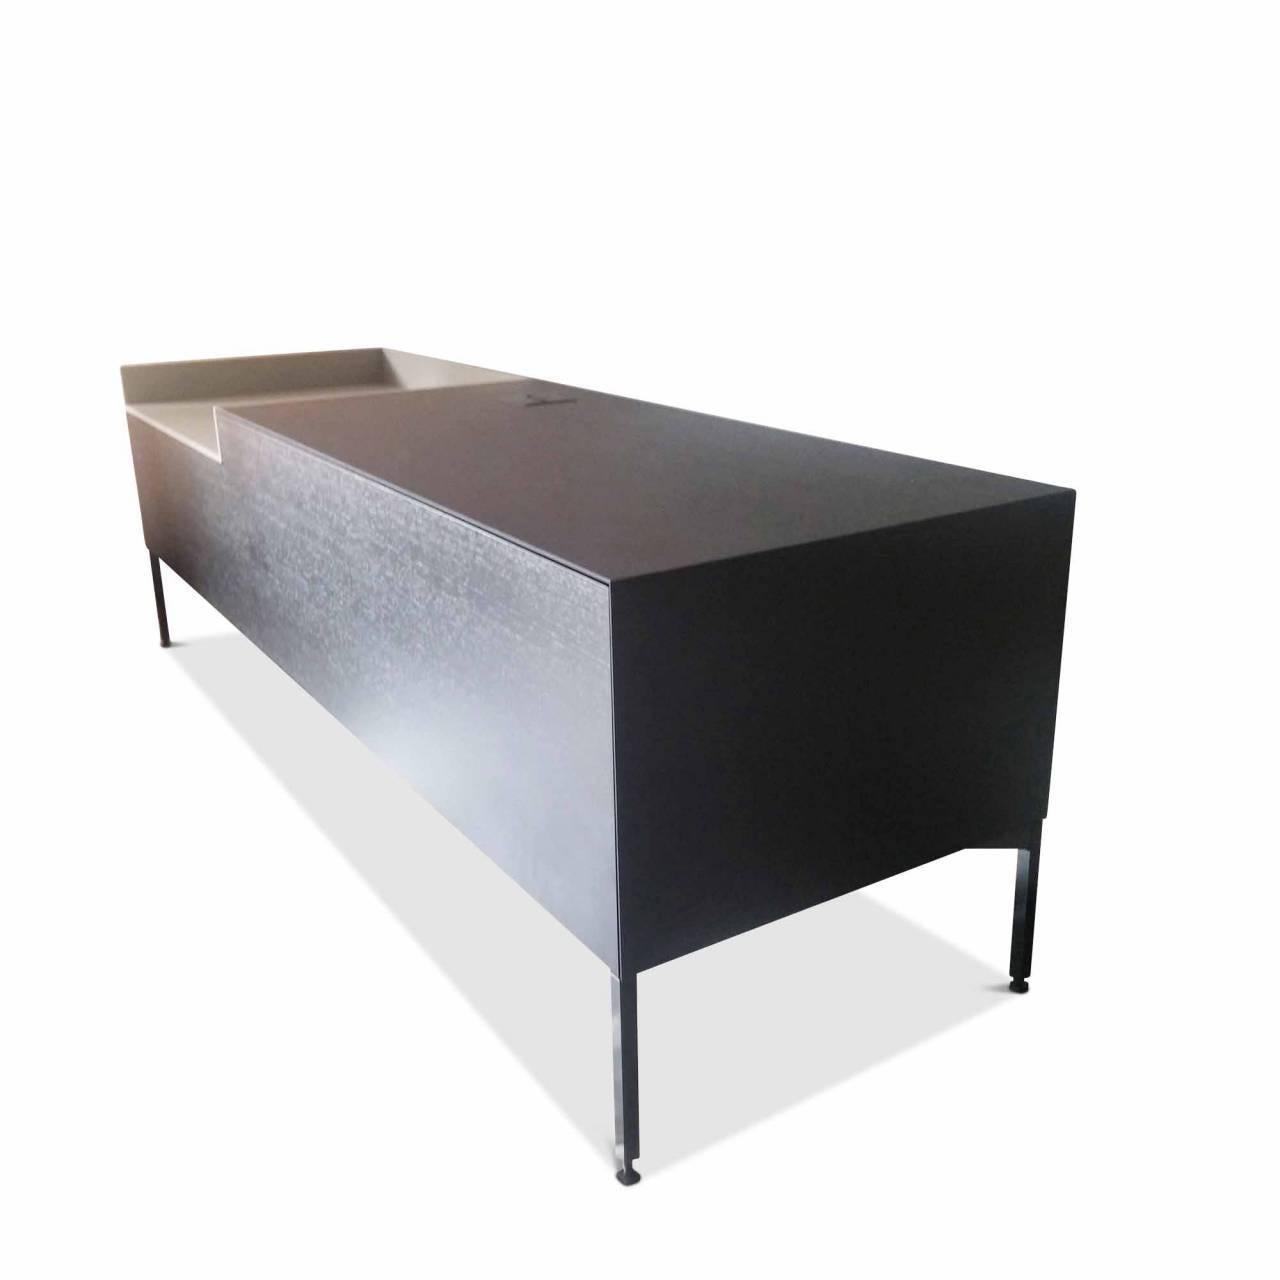 We are delighted to present to you the harmonious sideboard 